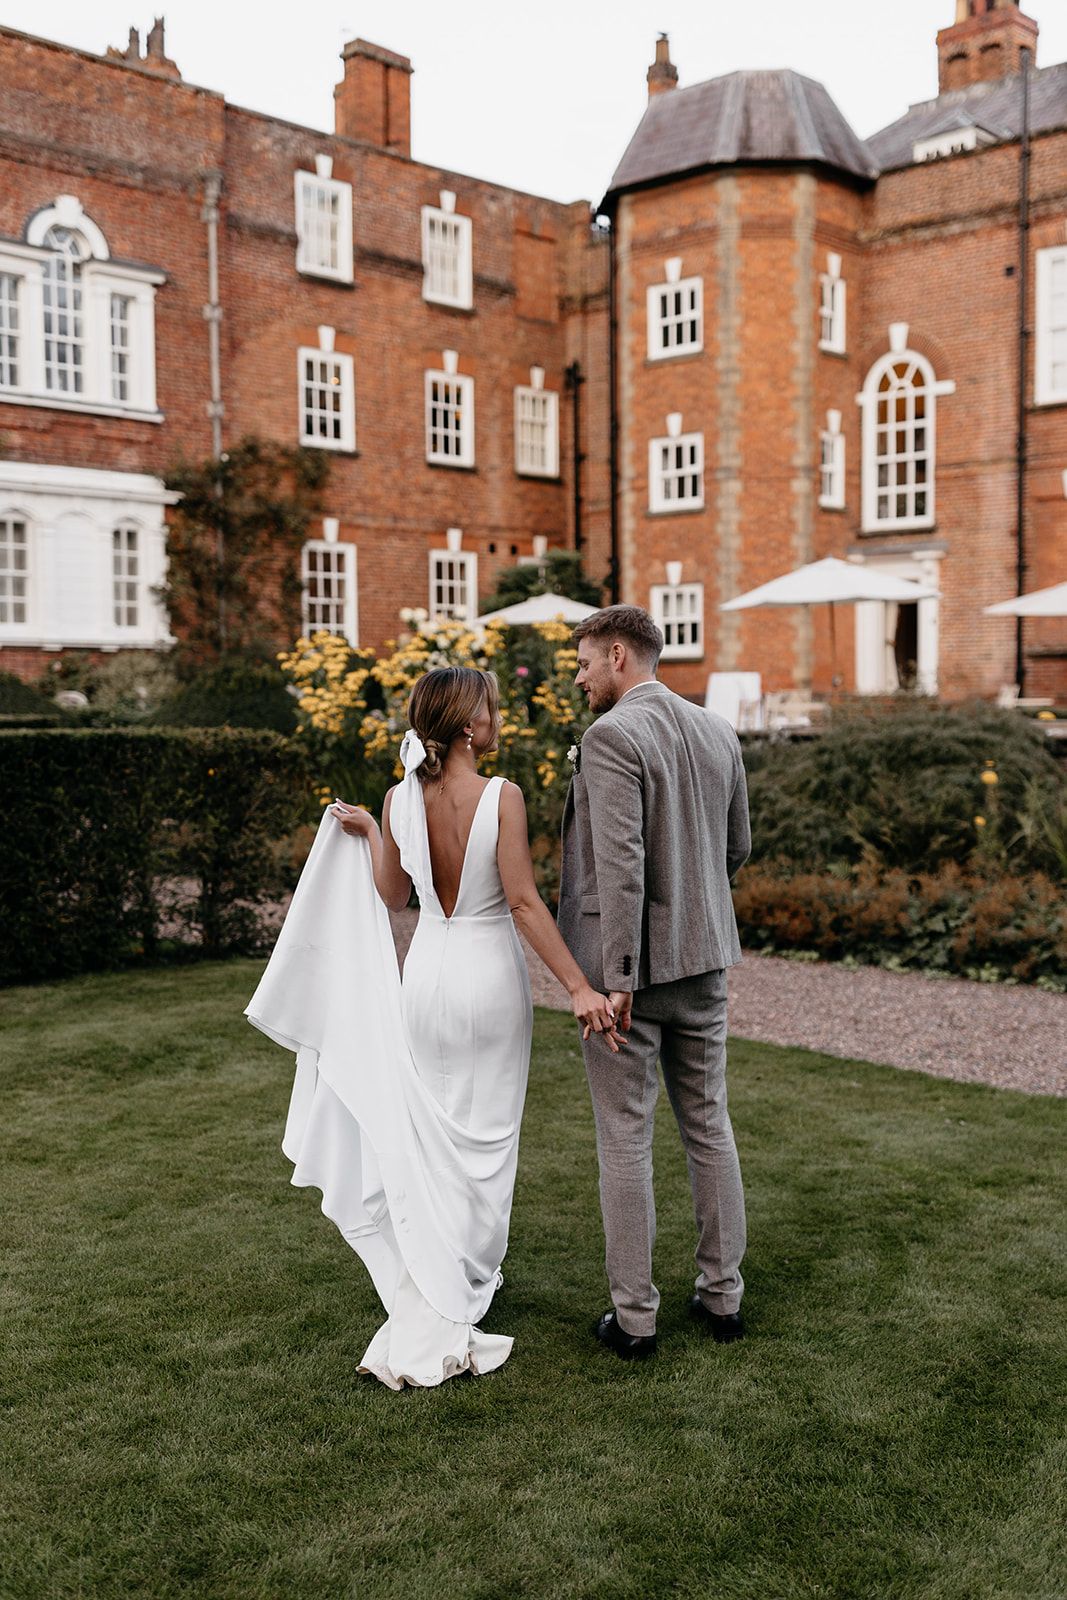 A bride and groom stand outside in a country garden in the middle of summer with a redbrick mansion in the background